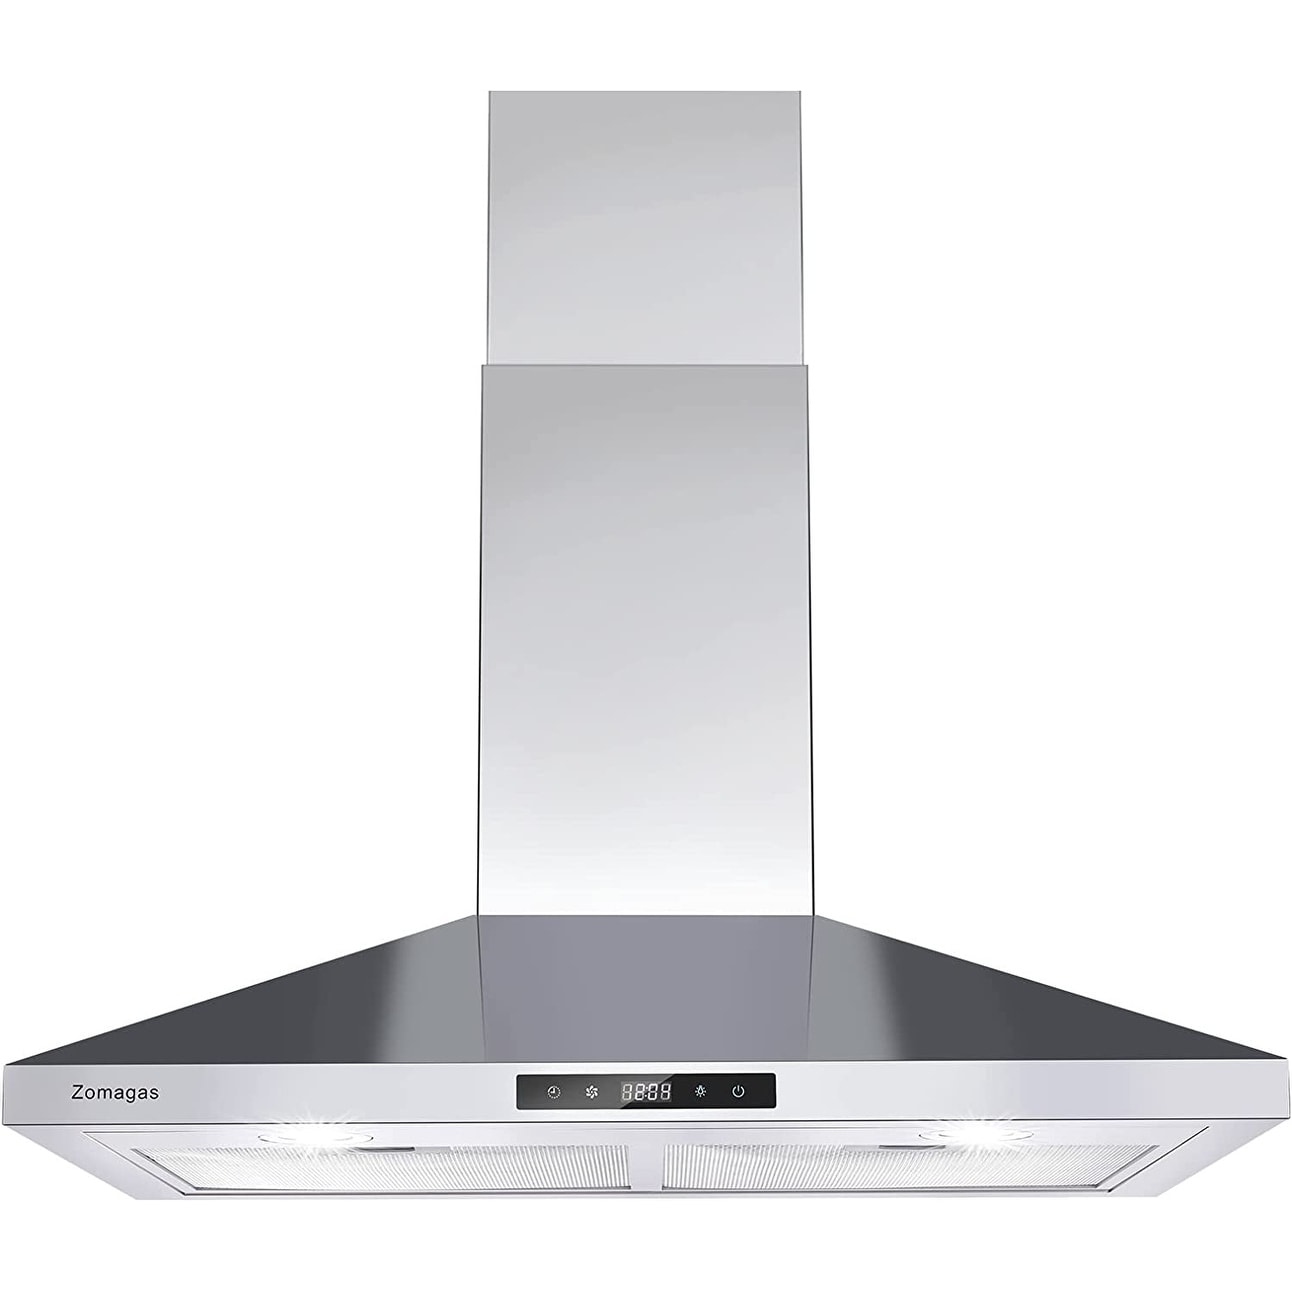 Zomagas Range Hood Insert 20 inch, Built-In Kitchen Hood 600CFM, Ducted/Ductless Convertible Stove Hood with Stainless Steel Baffle Filter, Vent